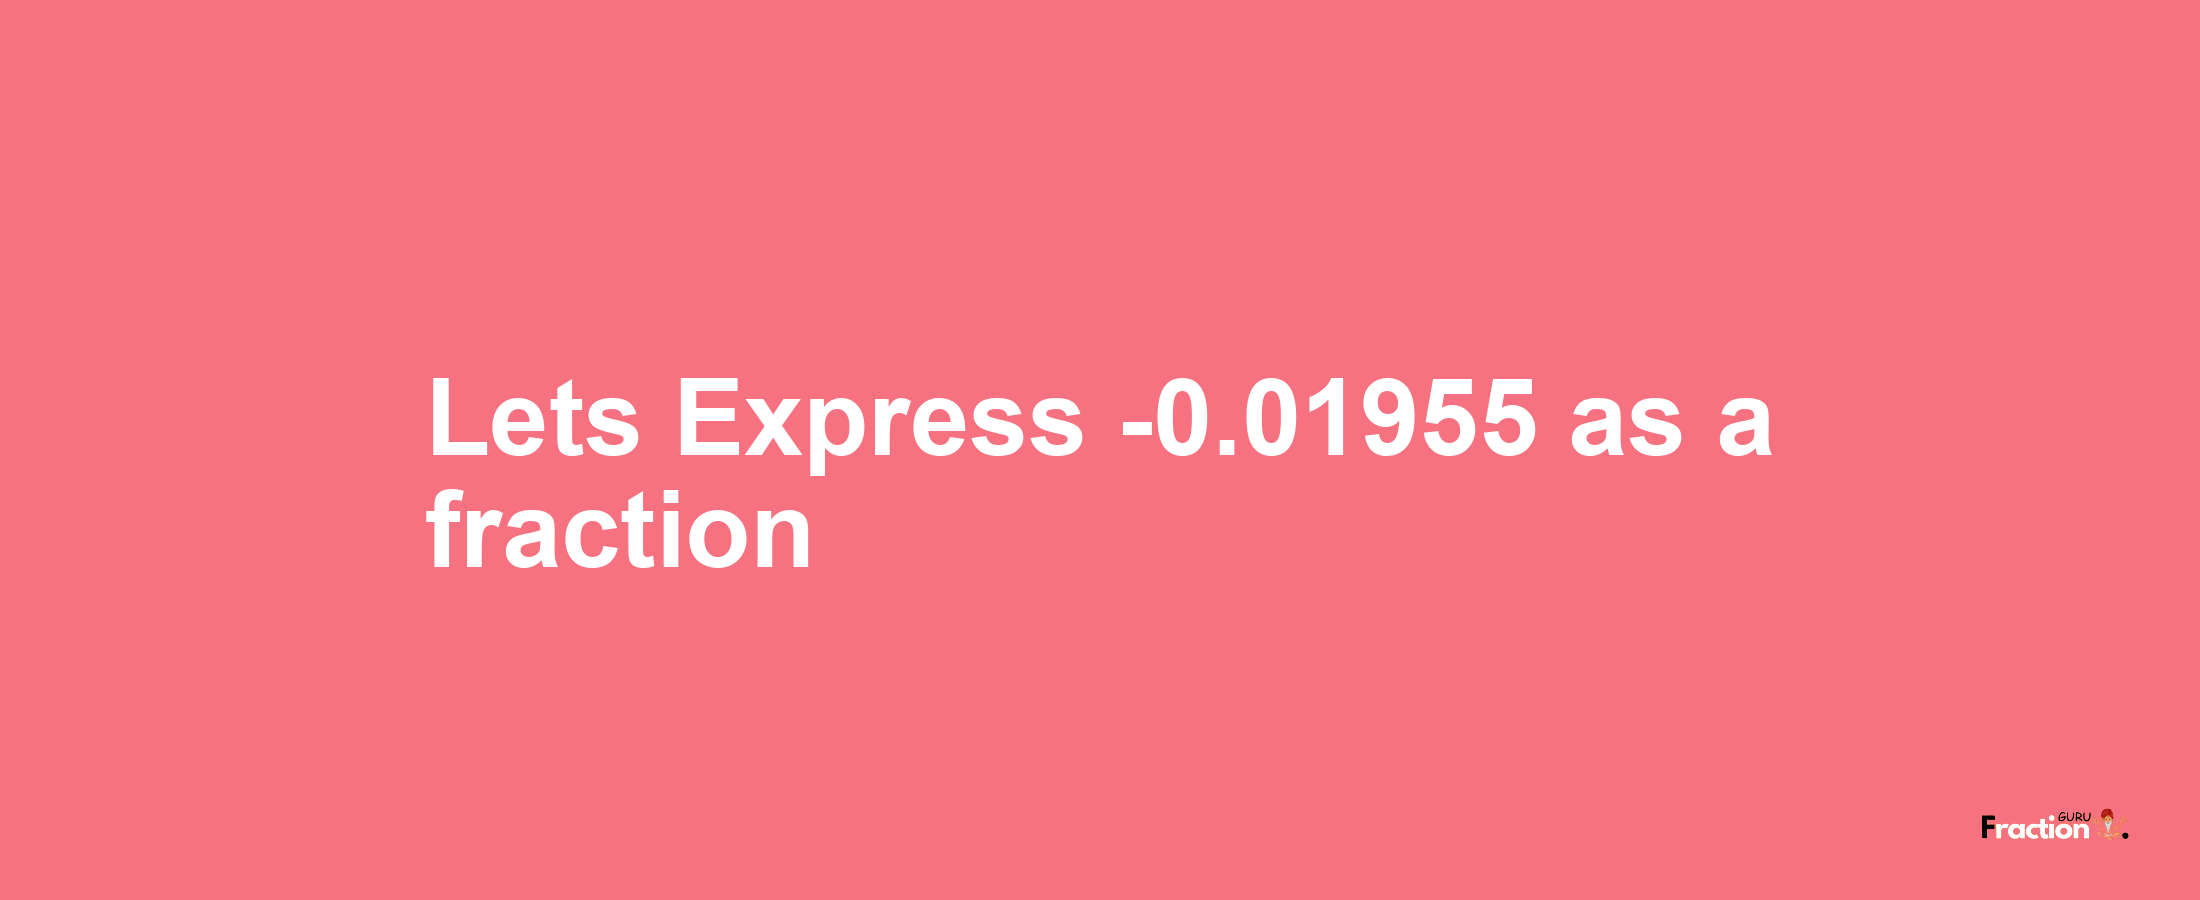 Lets Express -0.01955 as afraction